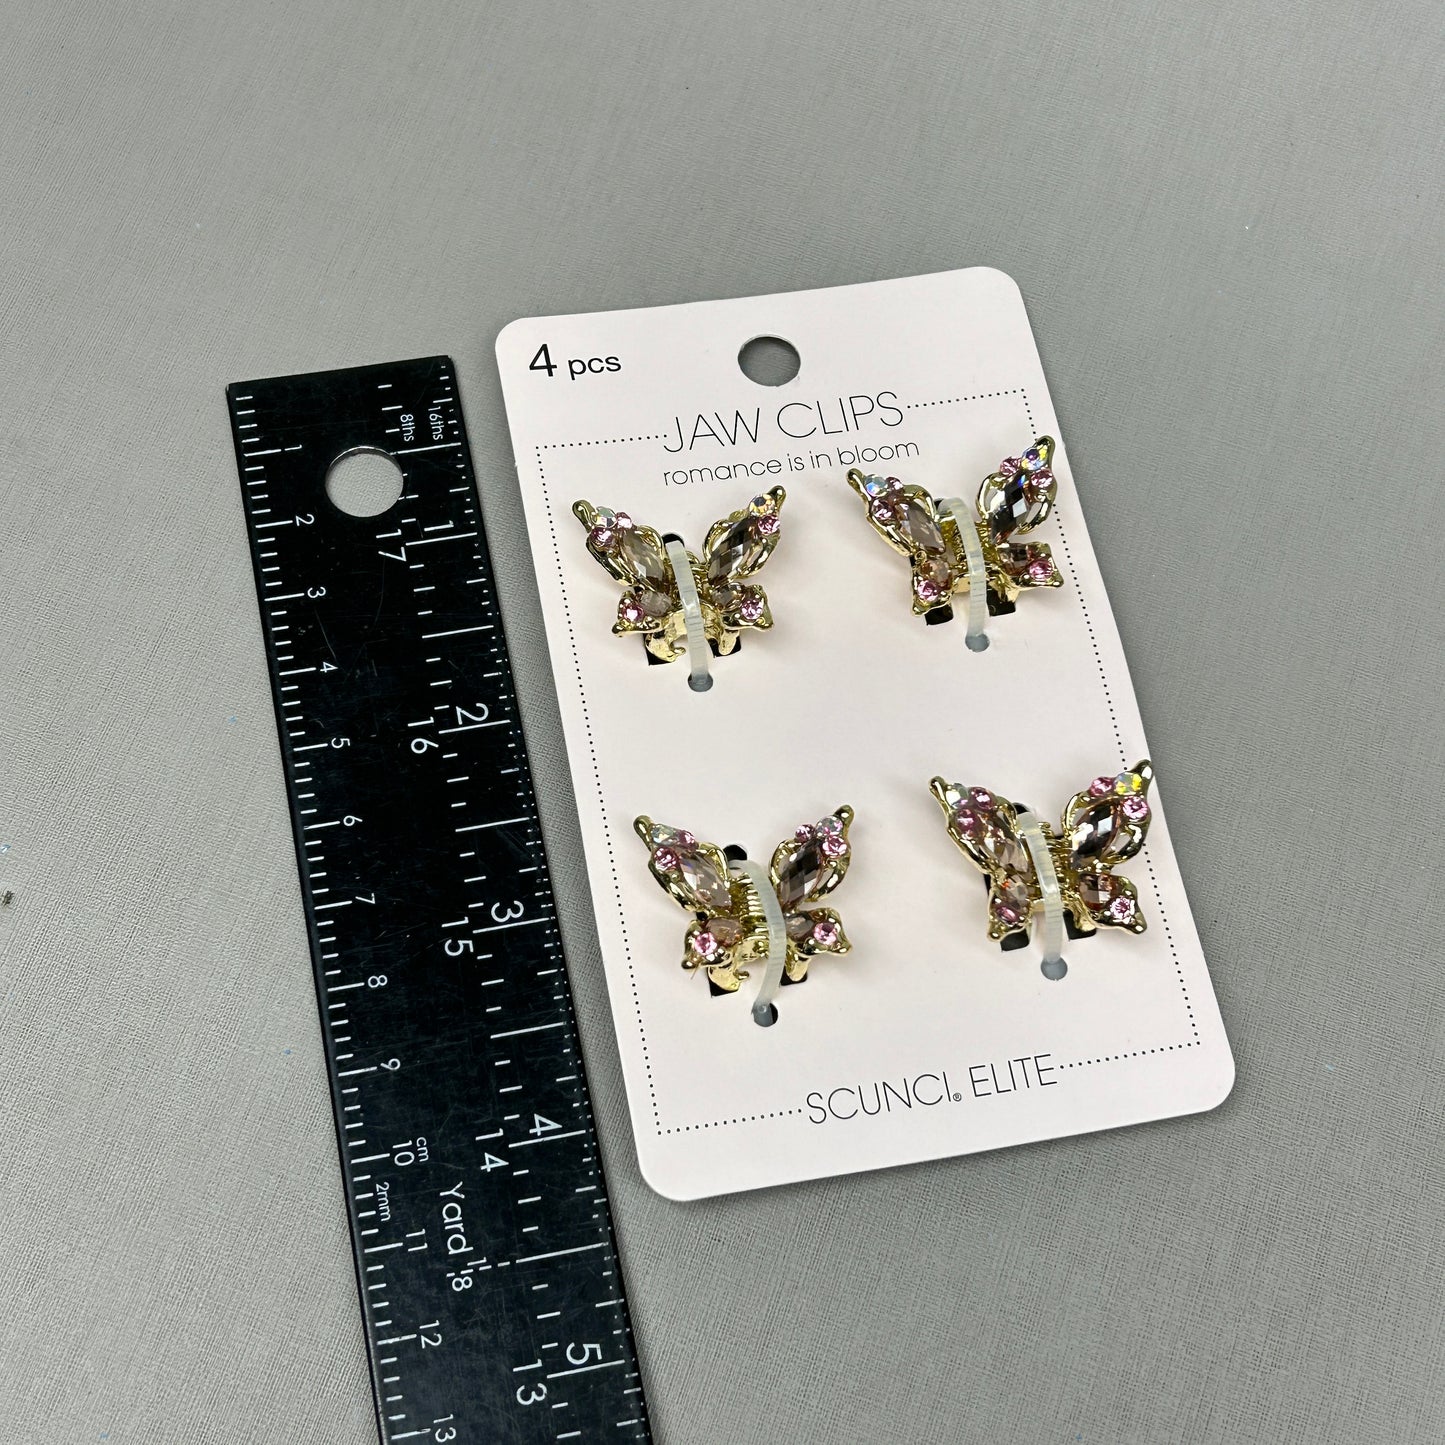 SCUNCI 3-PACK! Elite Mini Butterfly Jaw Clip, 4-Pieces (New)